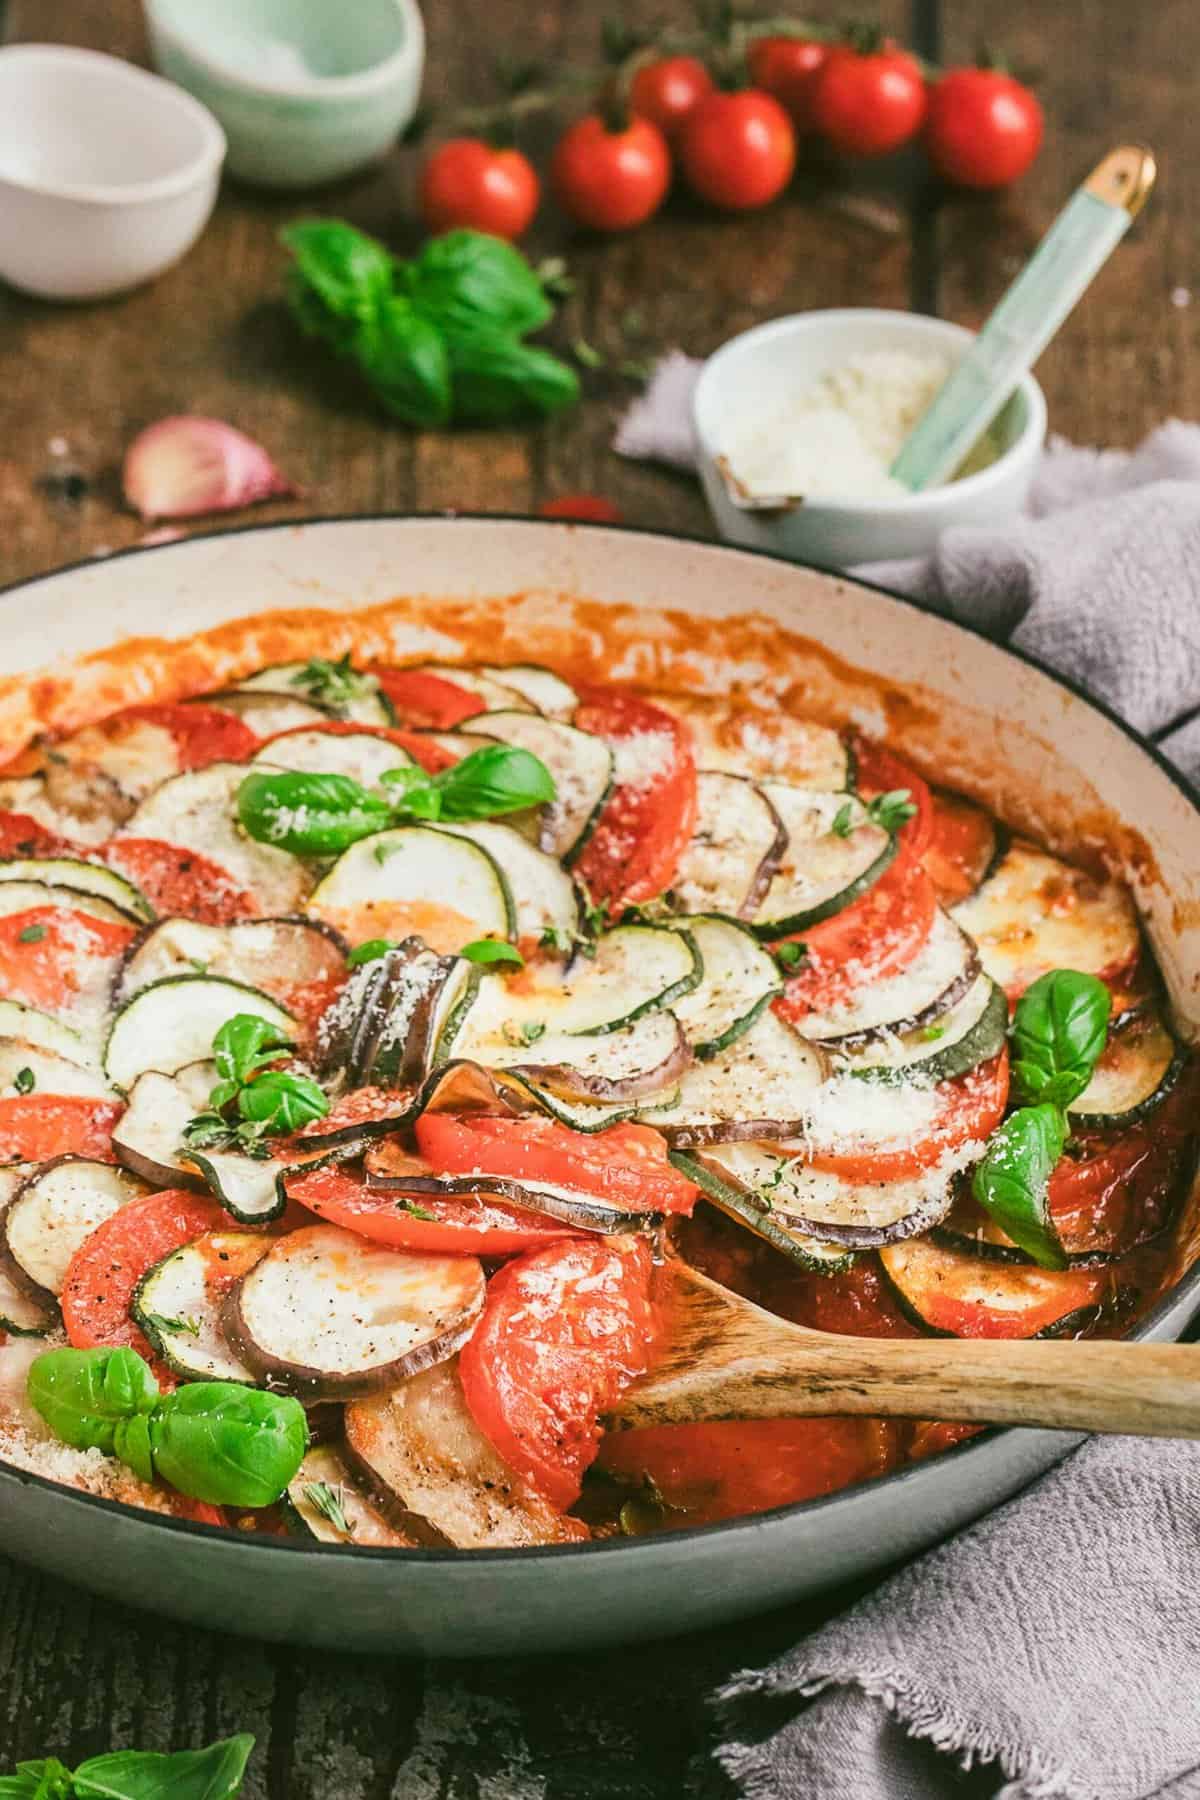 Ratatouille in round baking dish with wooden spoon